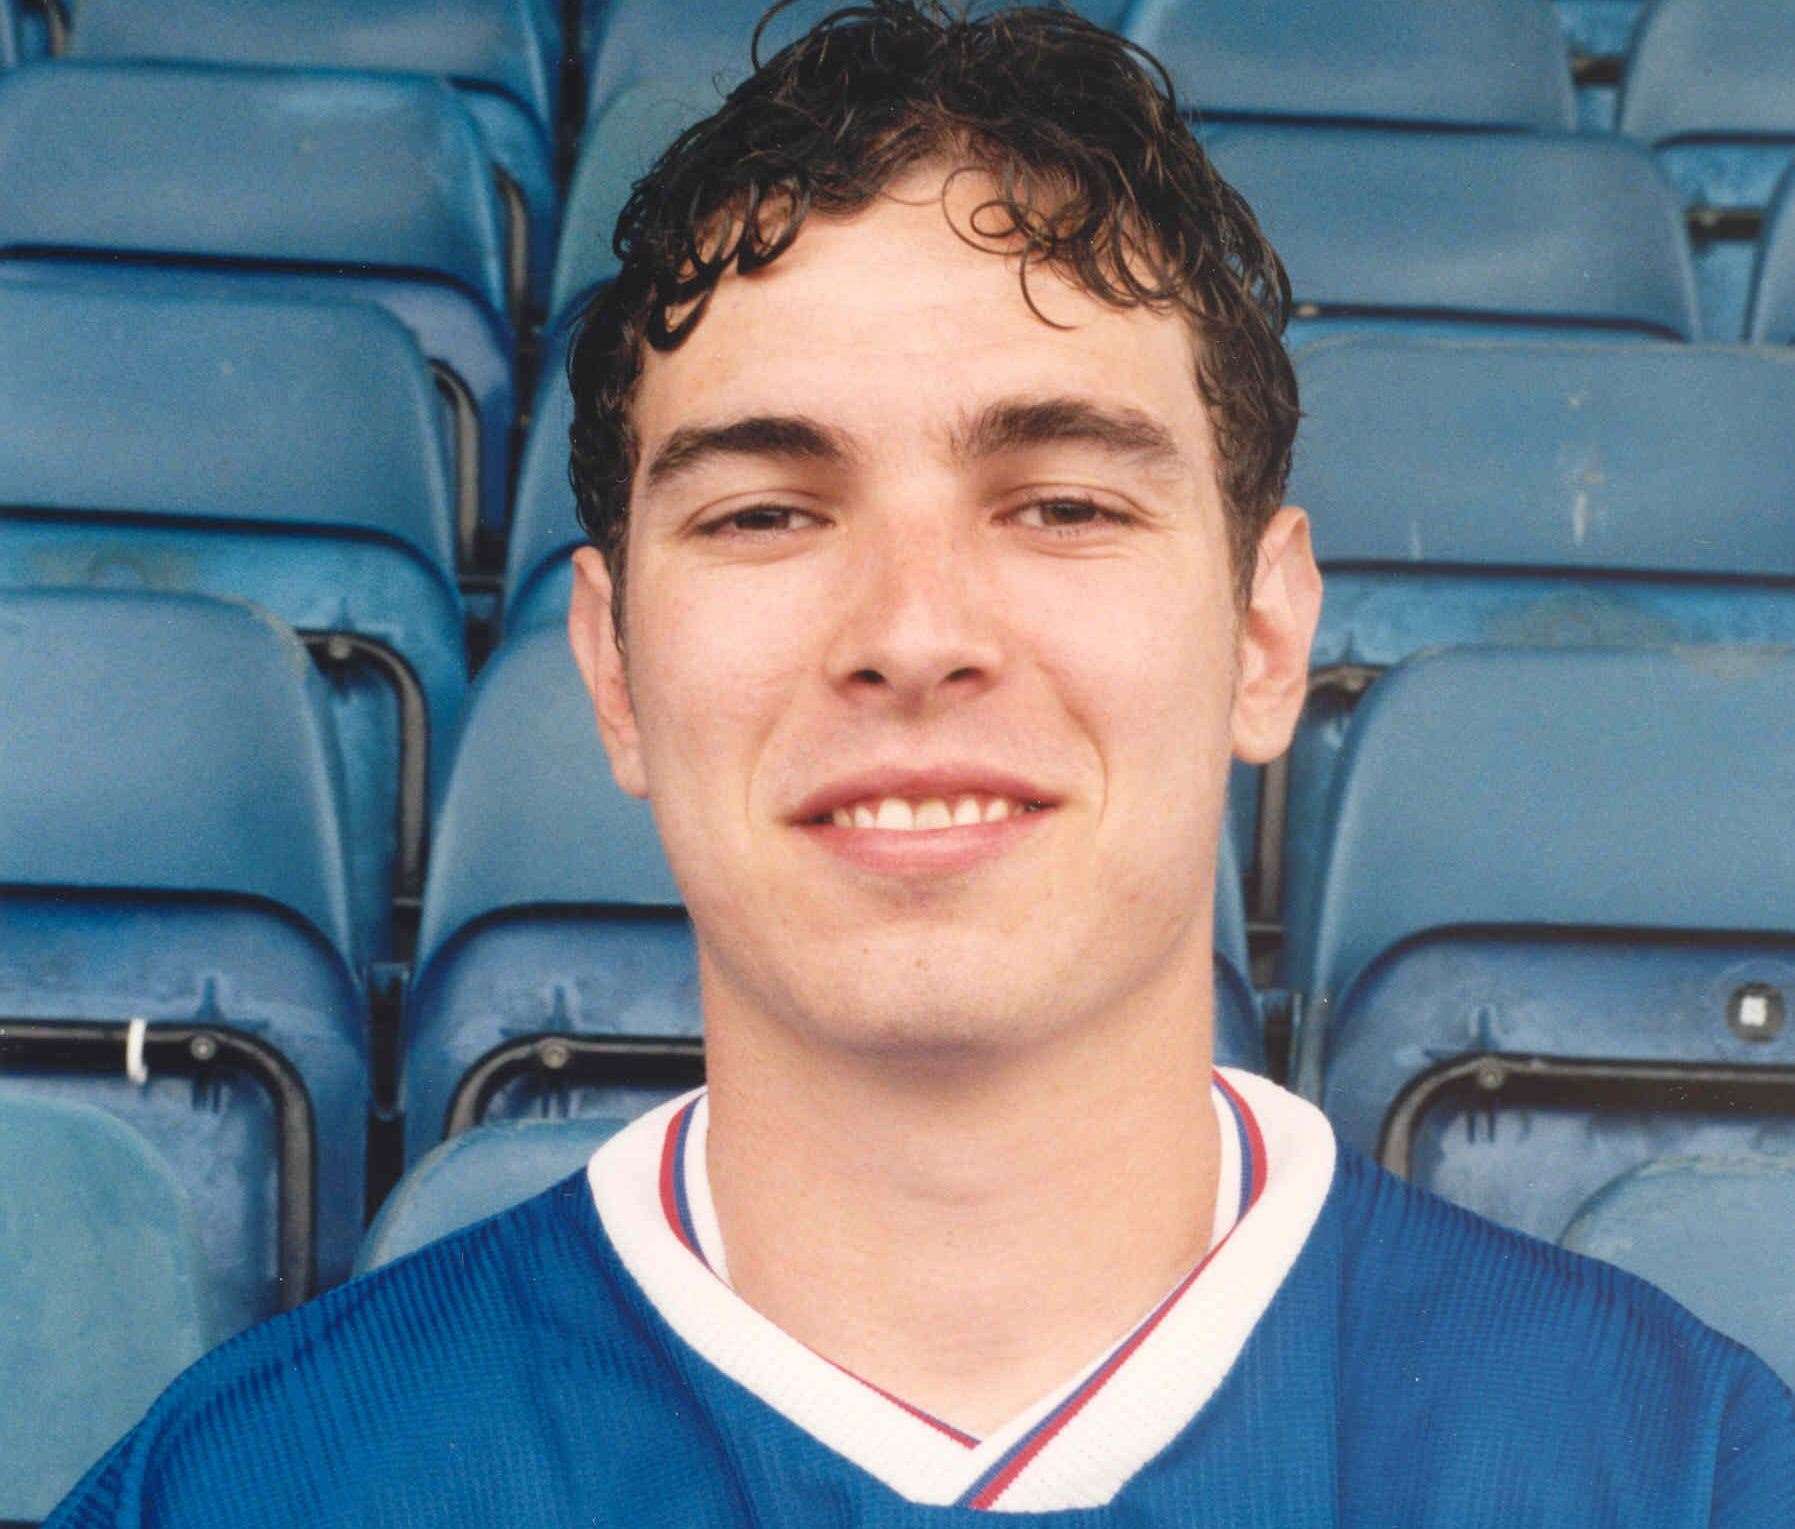 Lenny Piper has died at the age of 46. He played for the Gills between 1996 and 1998